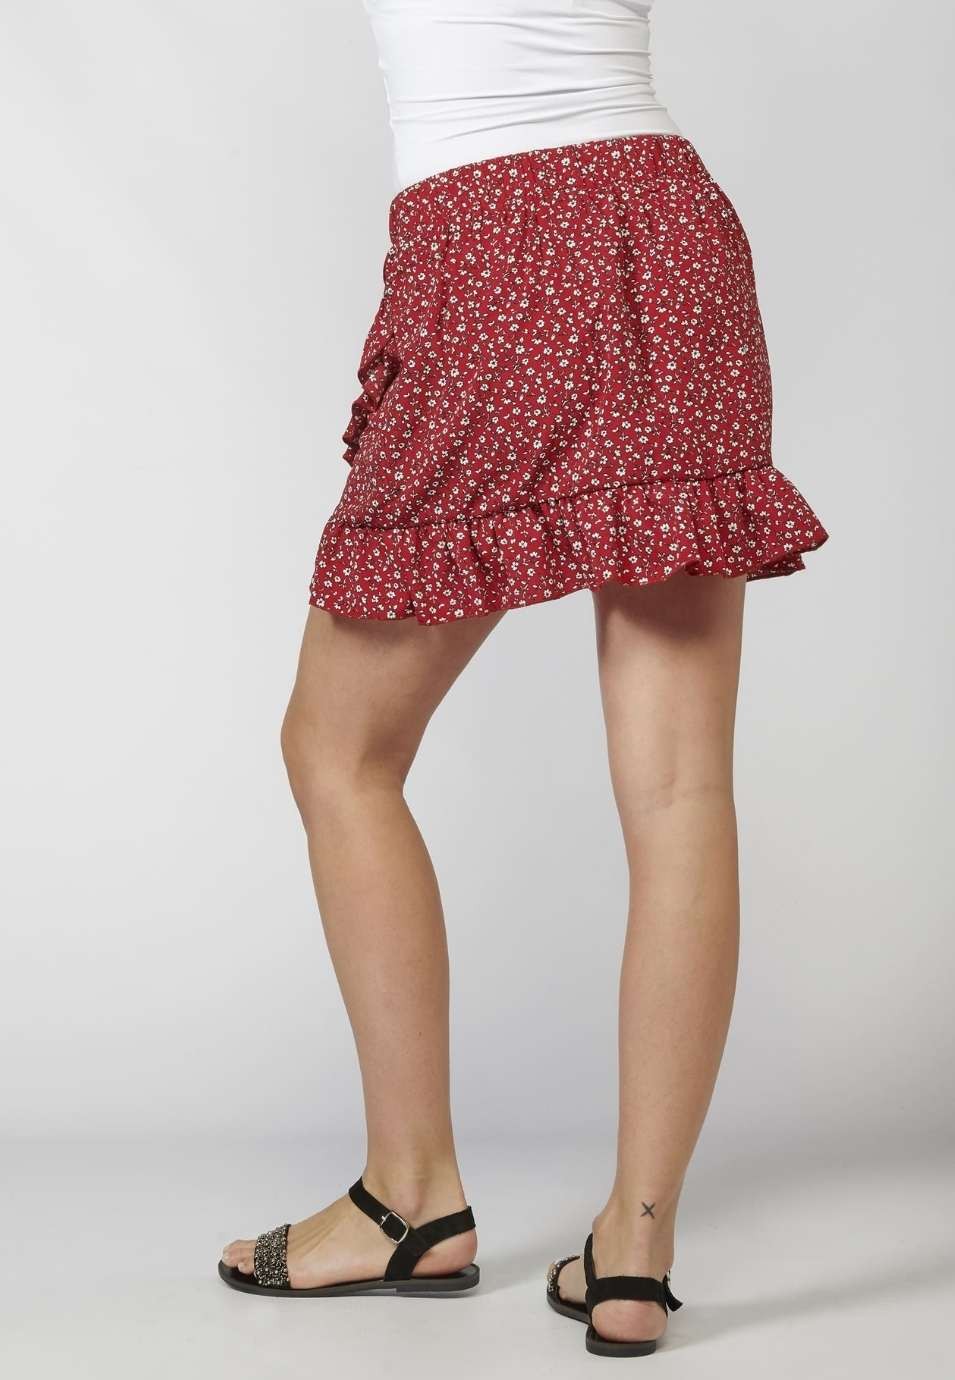 Floral print skirt for Woman Red color 2